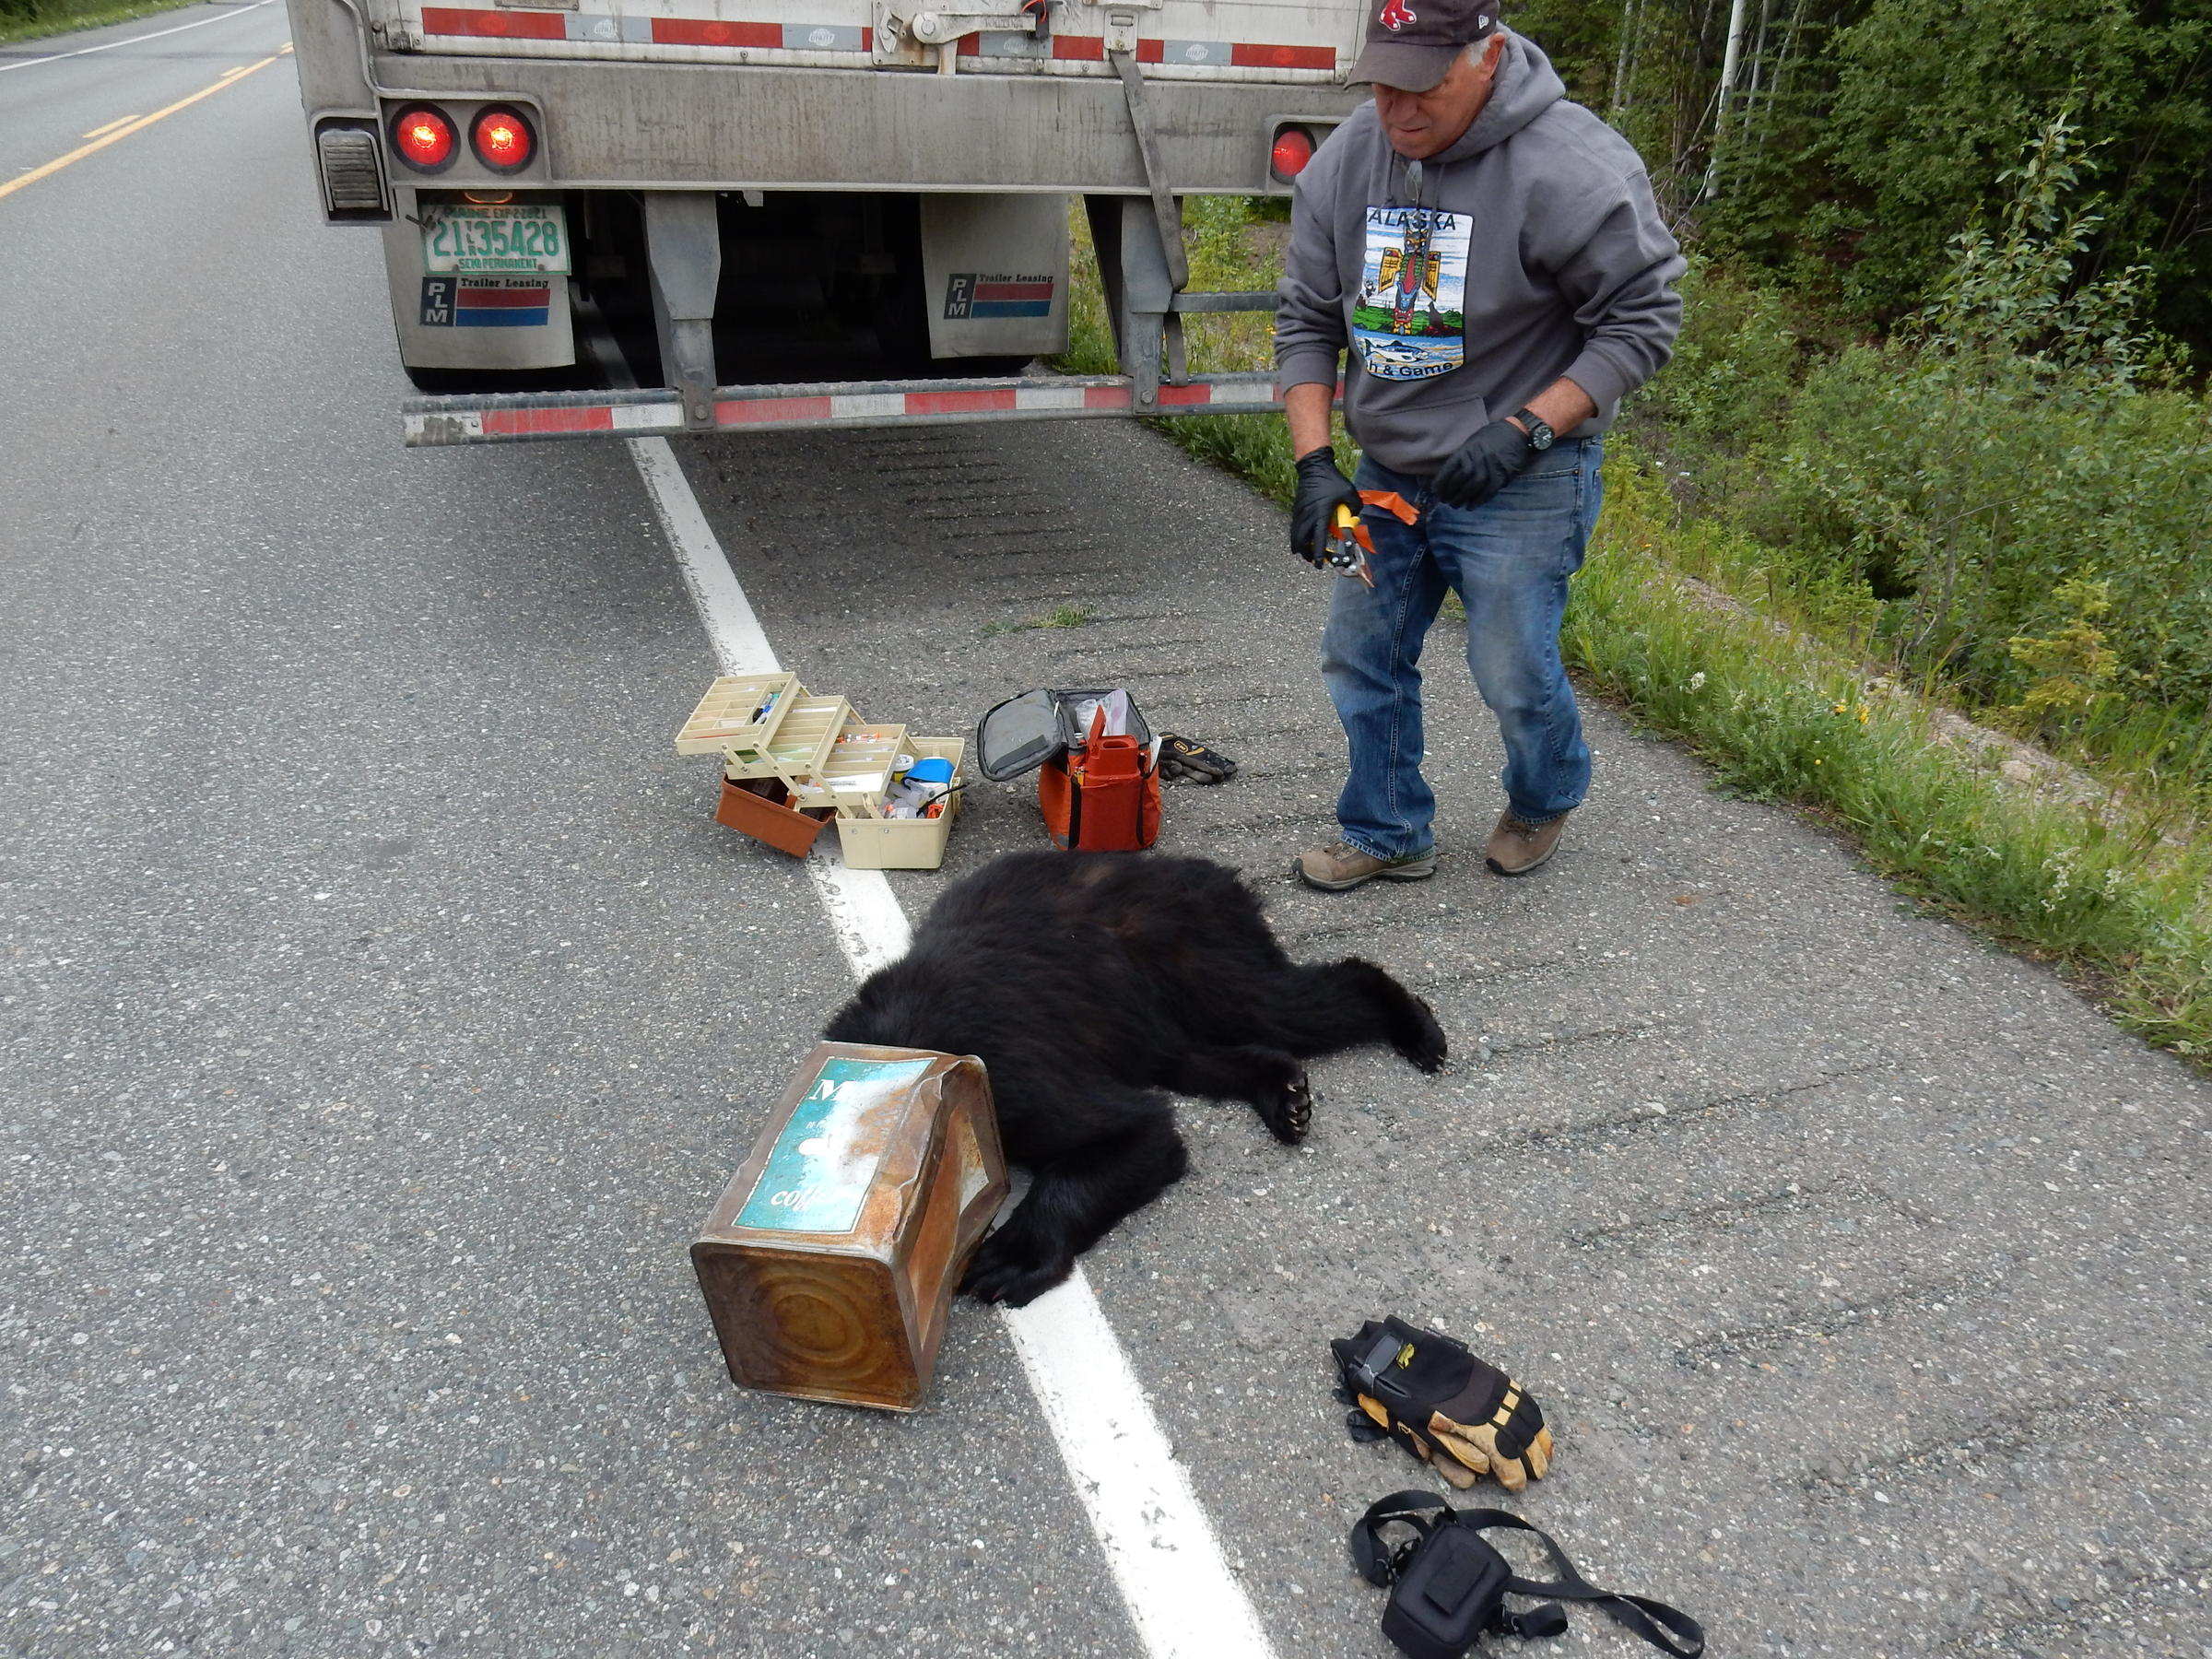 Wildlife Technician Bob Gingue approaches the bear after it's been darted, preparing to remove the coffee can. (Photo courtesy of Jeff Wells, Alaska Department of Fish and Game)